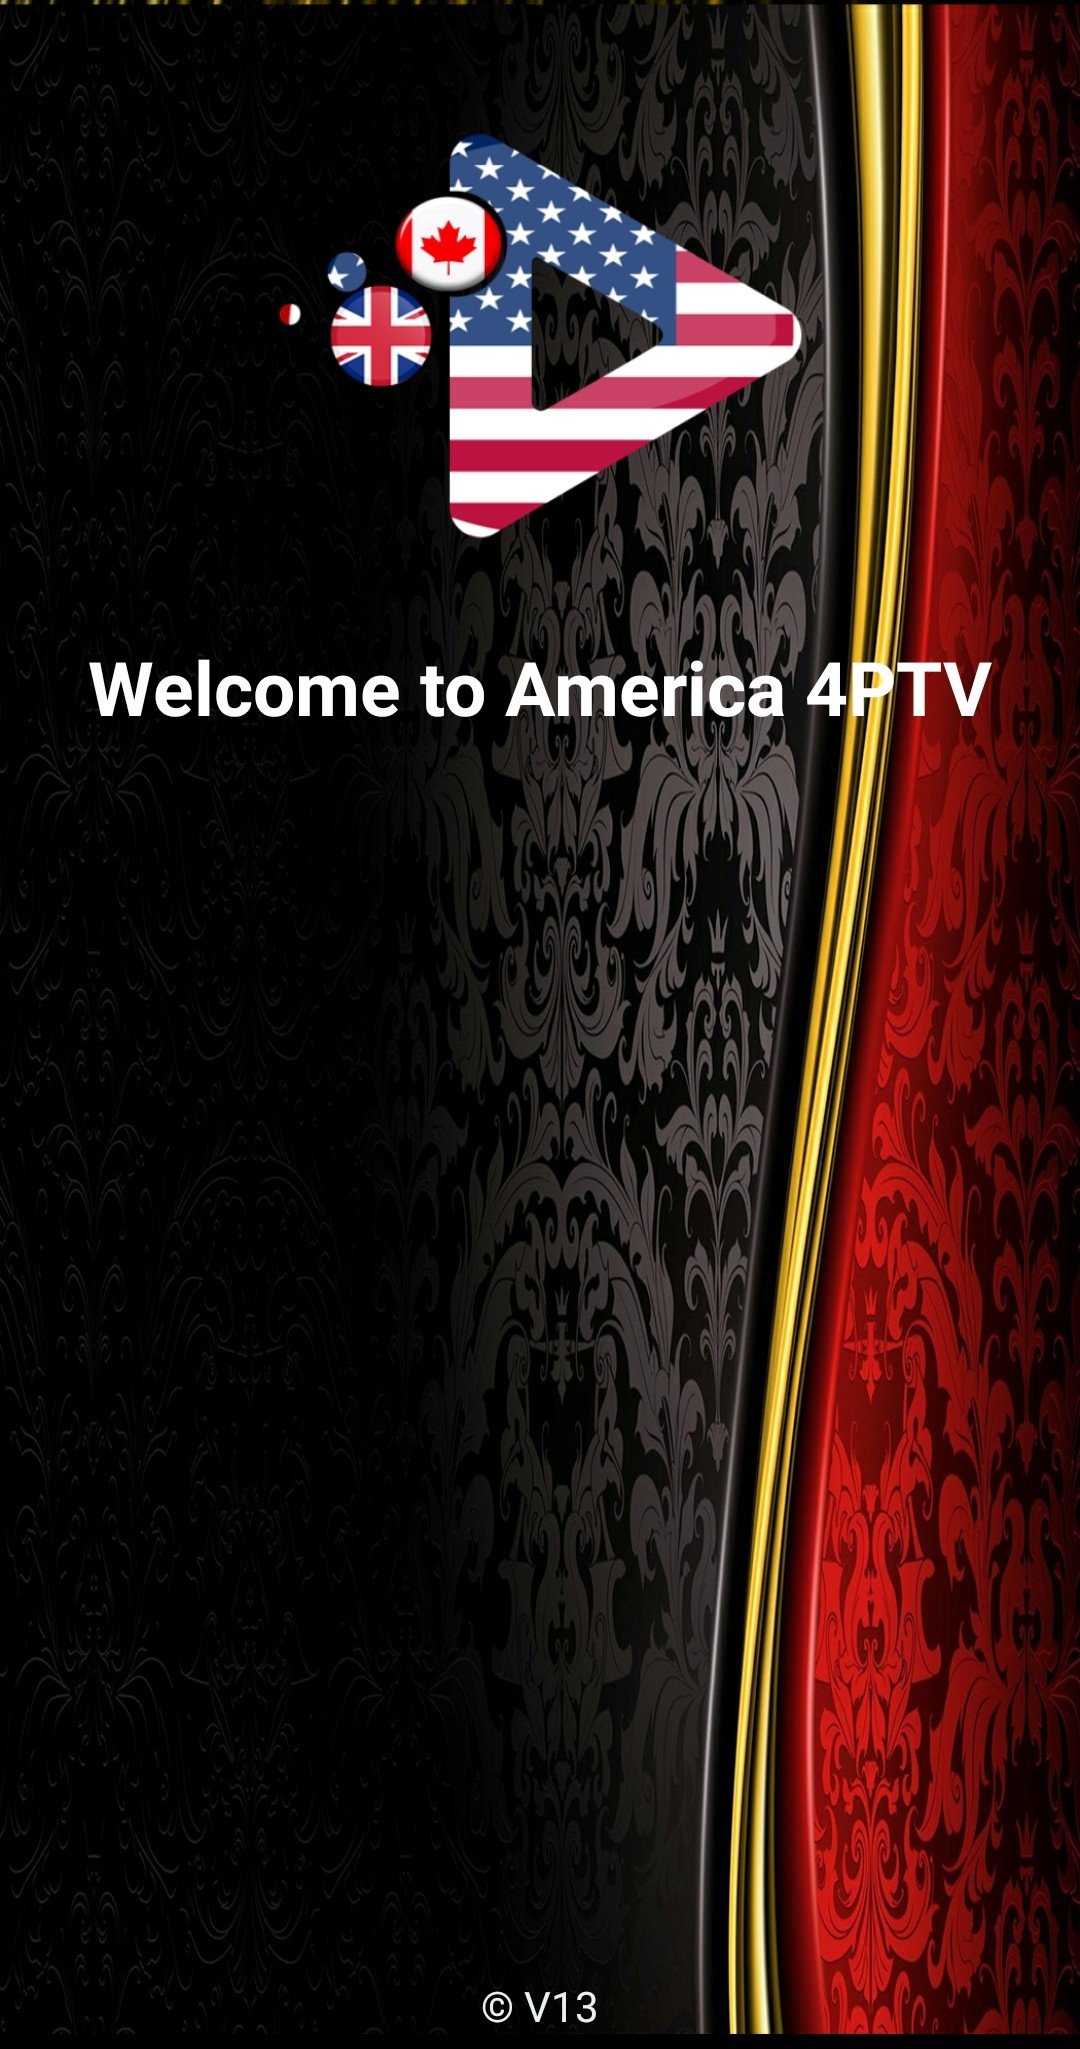 America 4ptv Android 